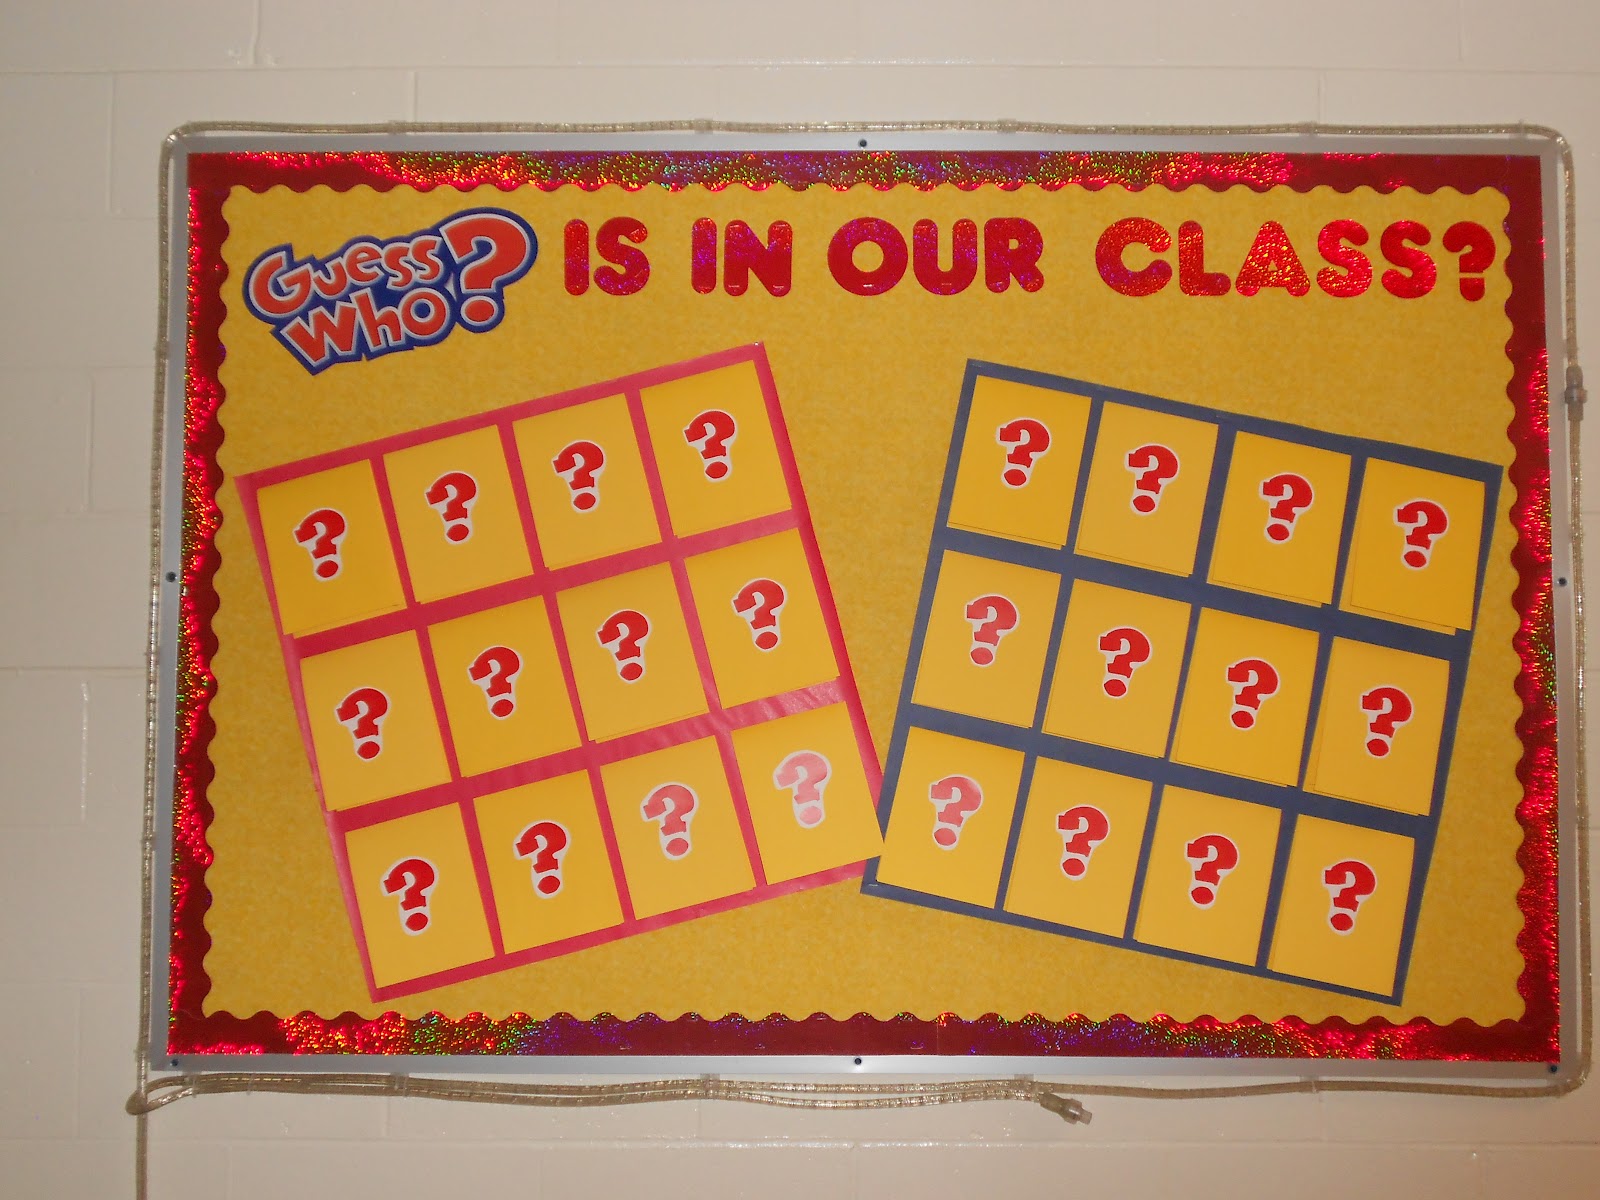 A bulletin board is designed to look like the board game Guess who.